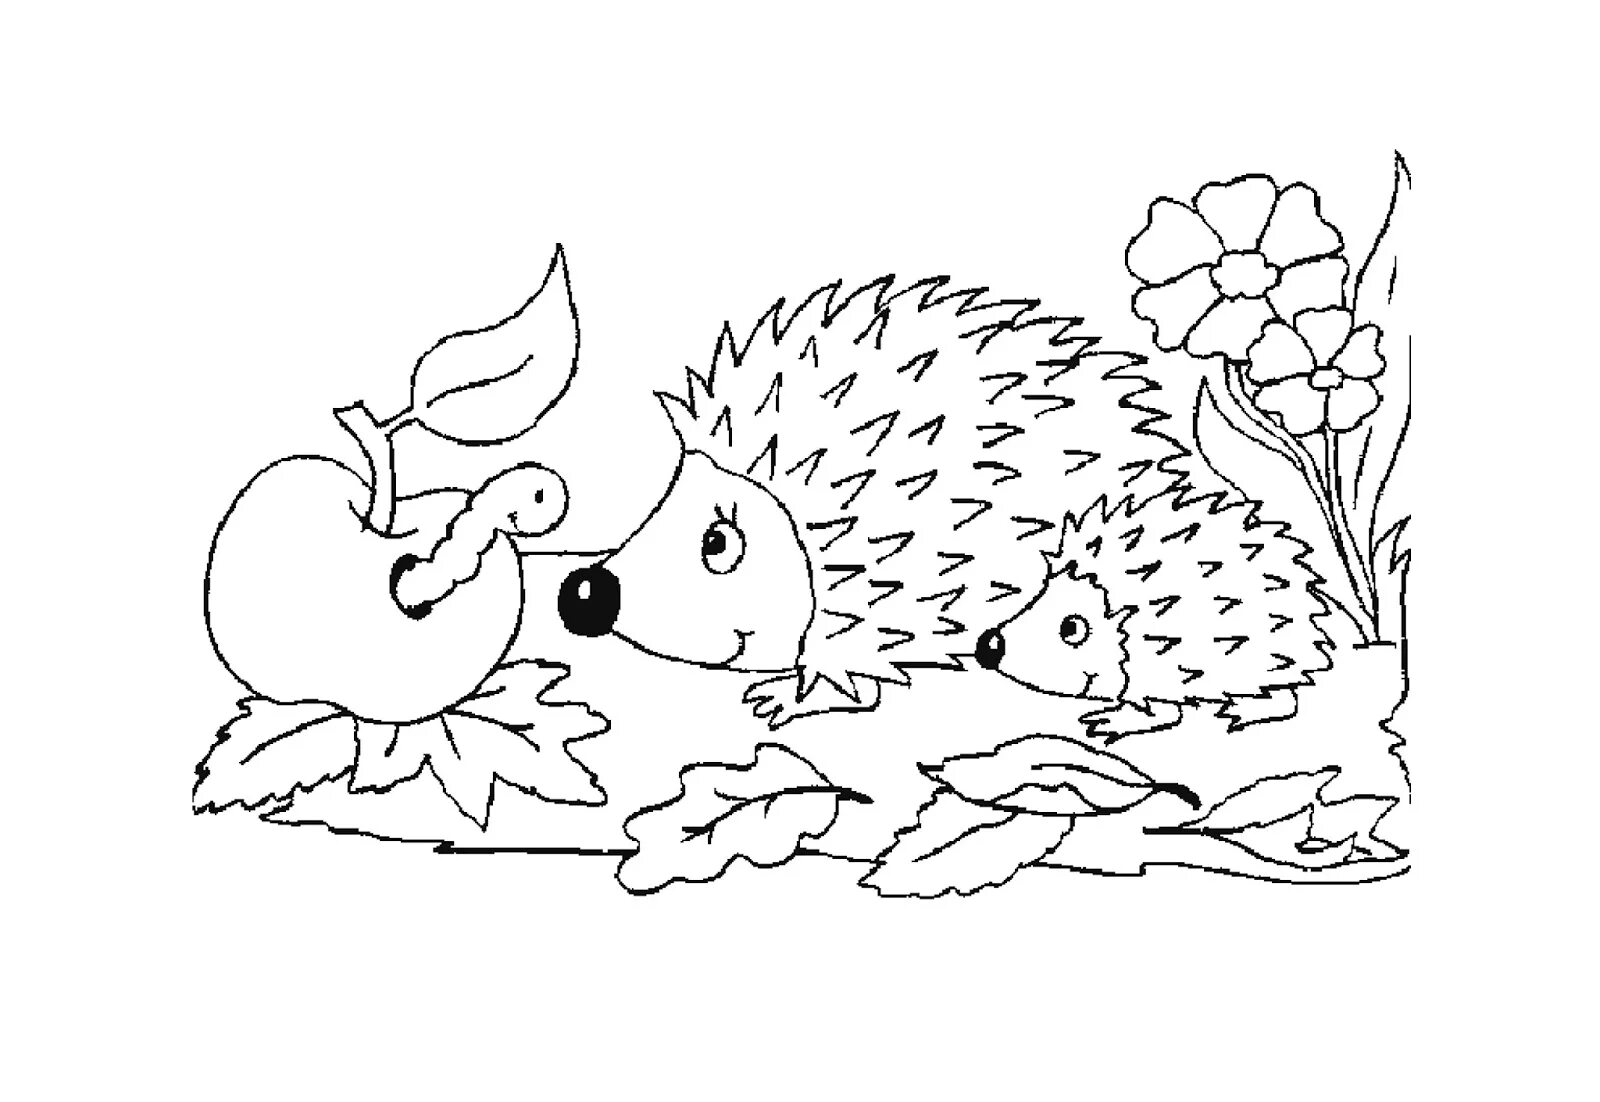 Colorful drawing of a hedgehog